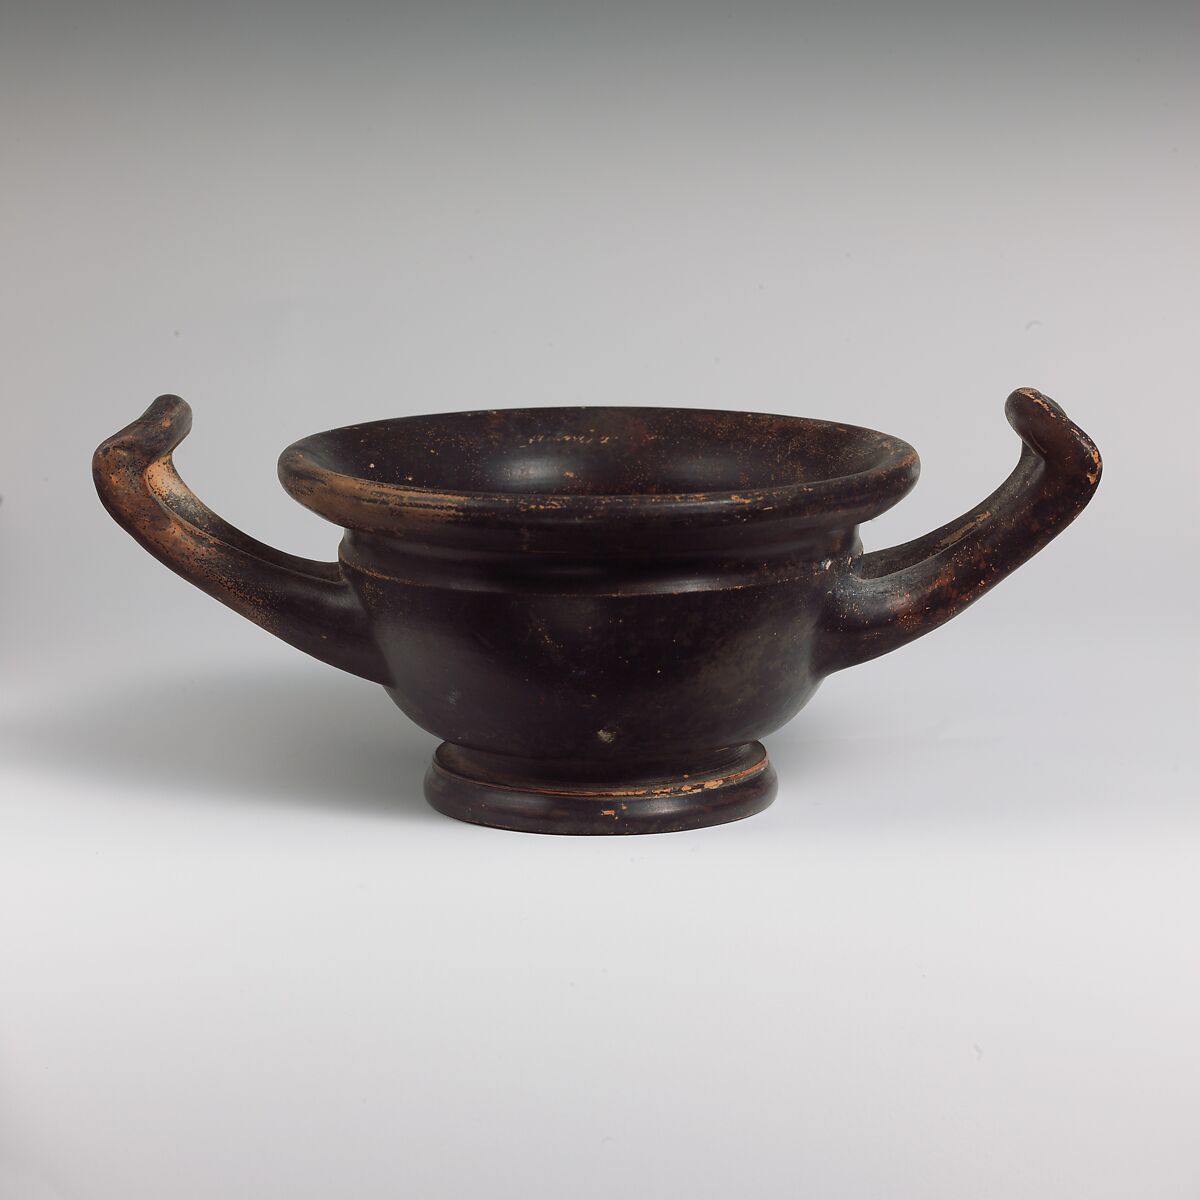 Terracotta cup-kantharos (drinking cup), Terracotta, Greek, Attic 